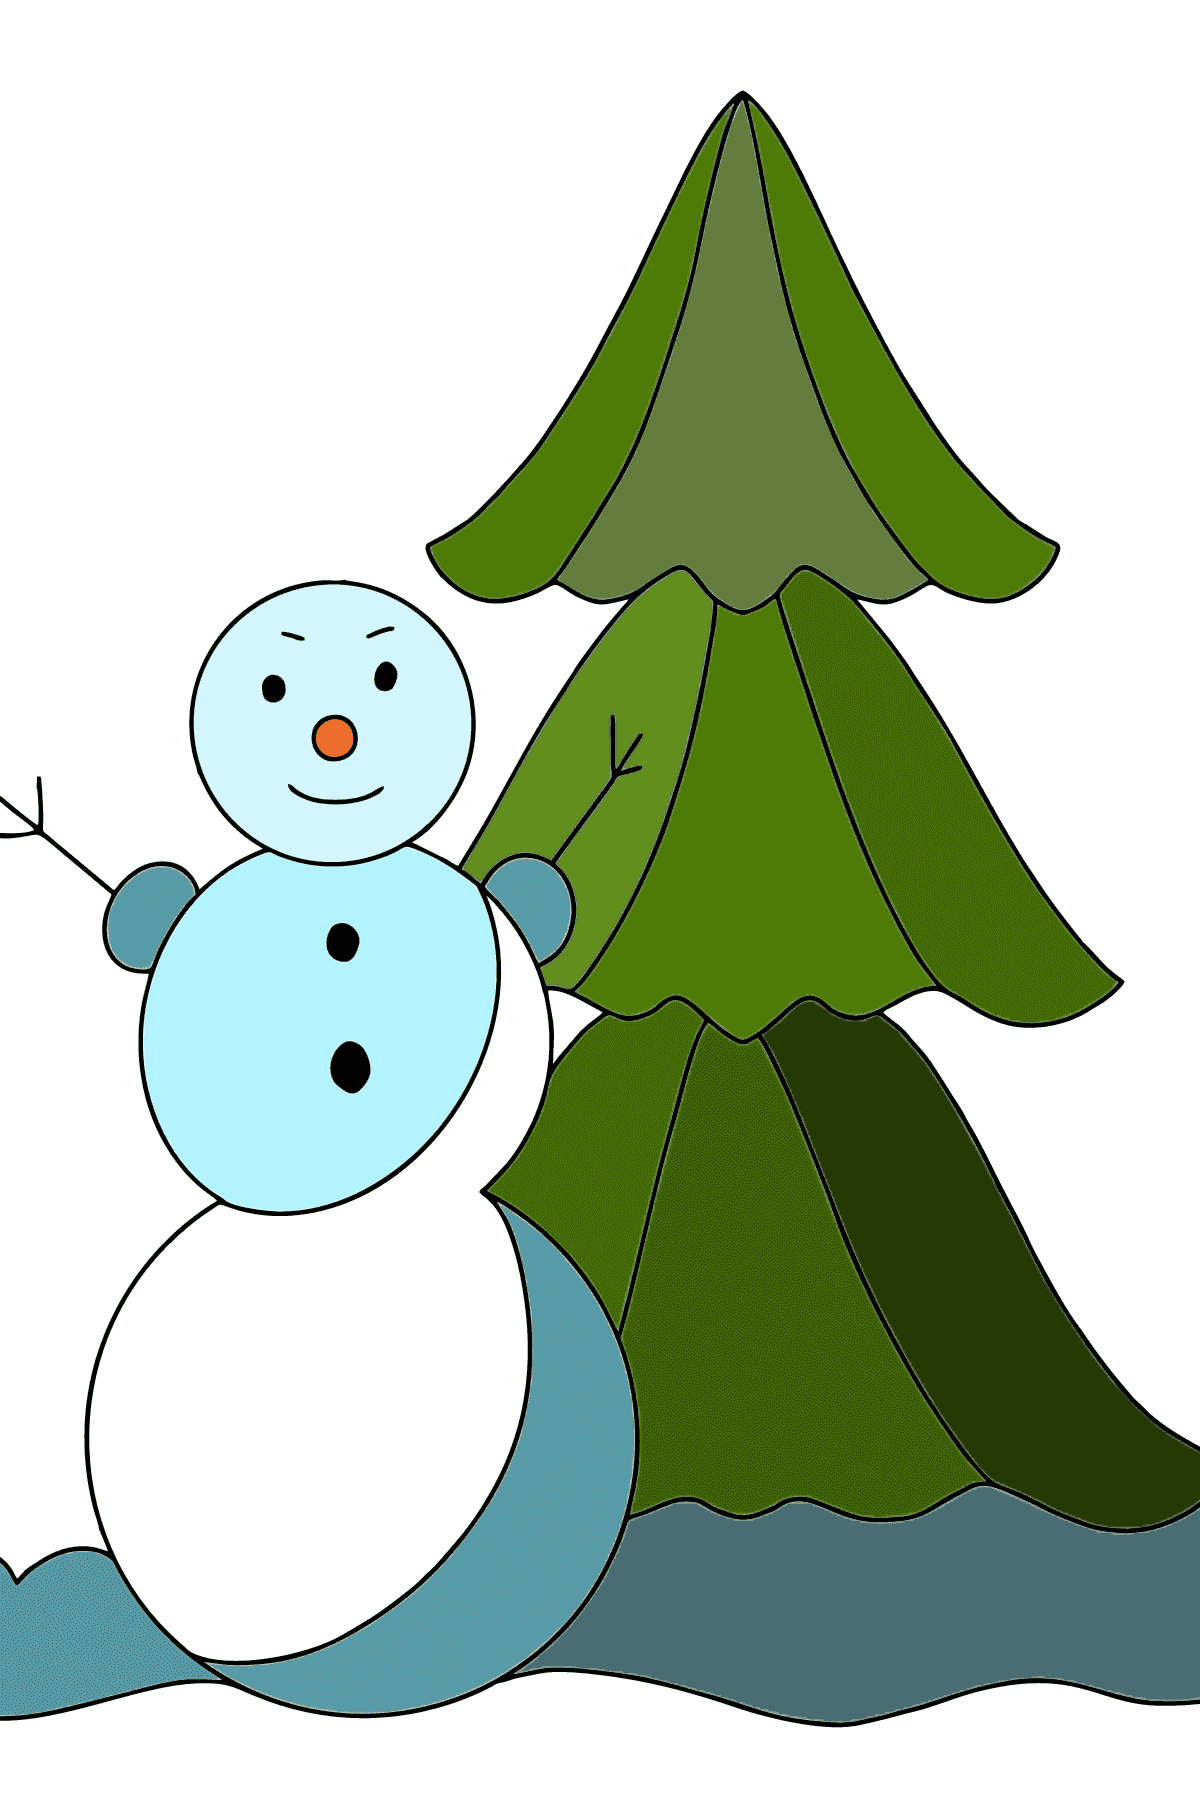 Snowman and Christmas Tree coloring page - Coloring Pages for Kids